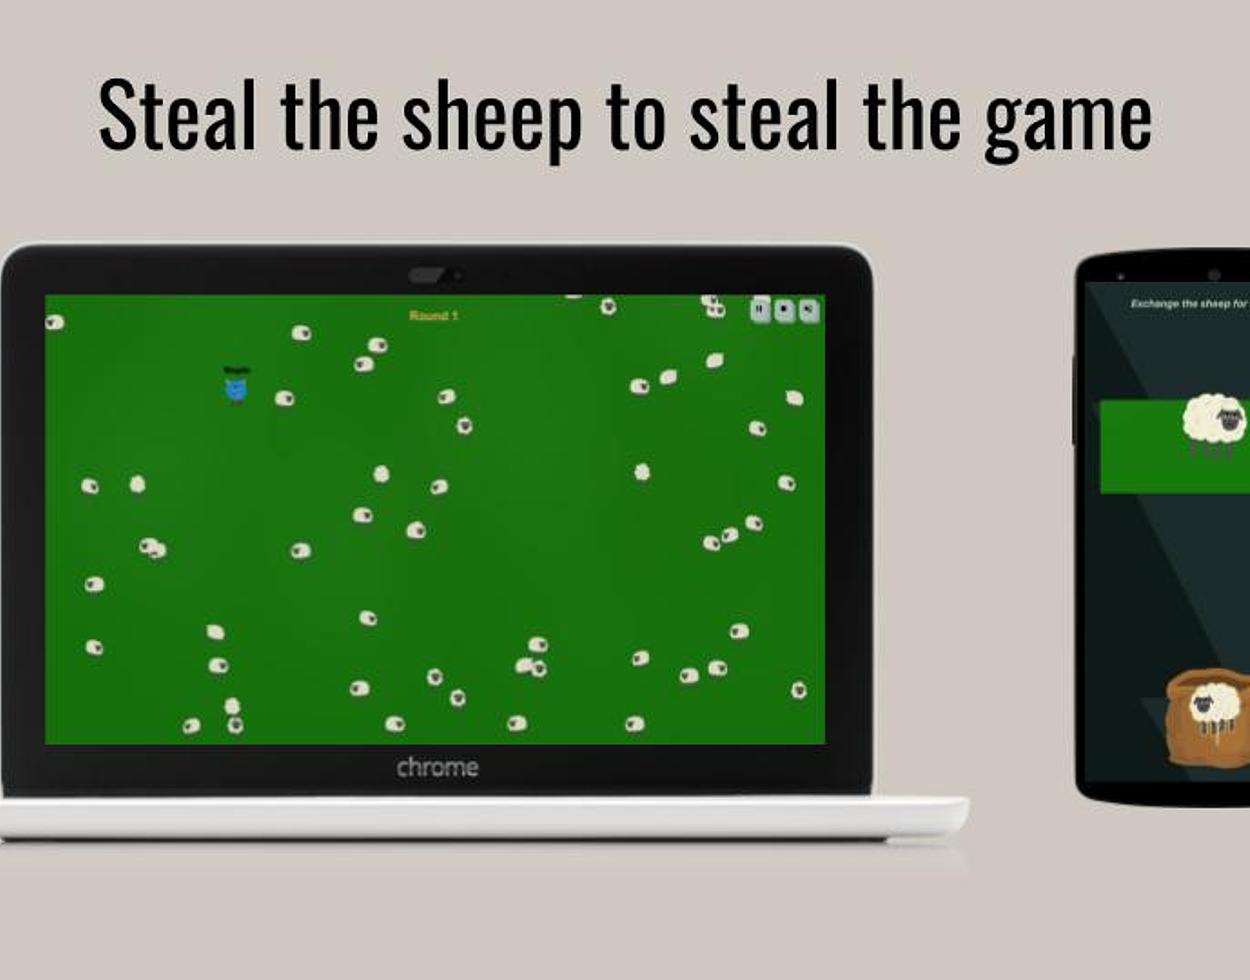 Steal the sheep and trick your friends